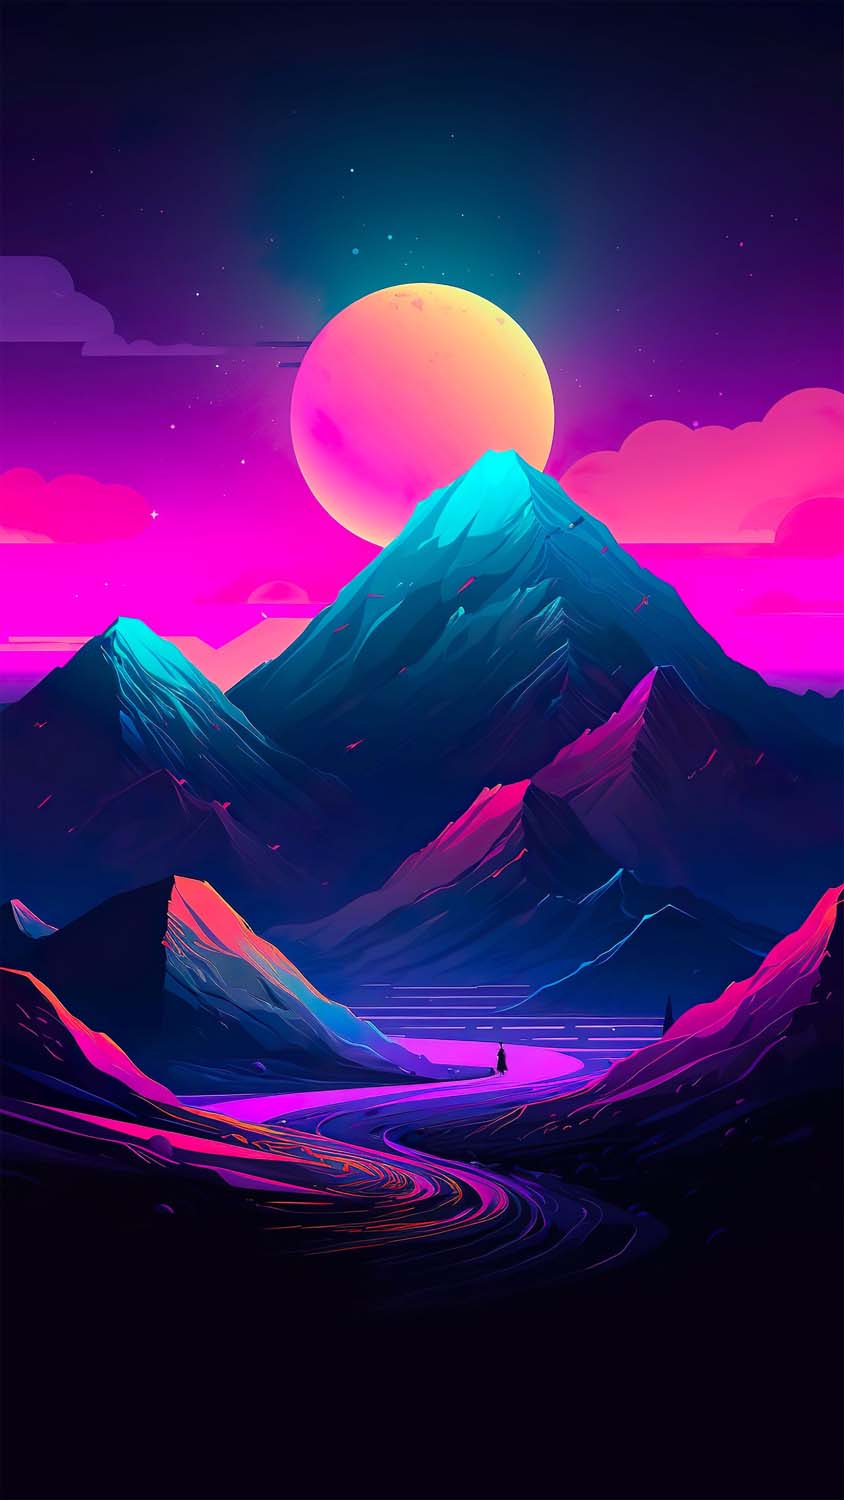 Amoled Mountains iPhone Wallpaper HD - iPhone Wallpapers